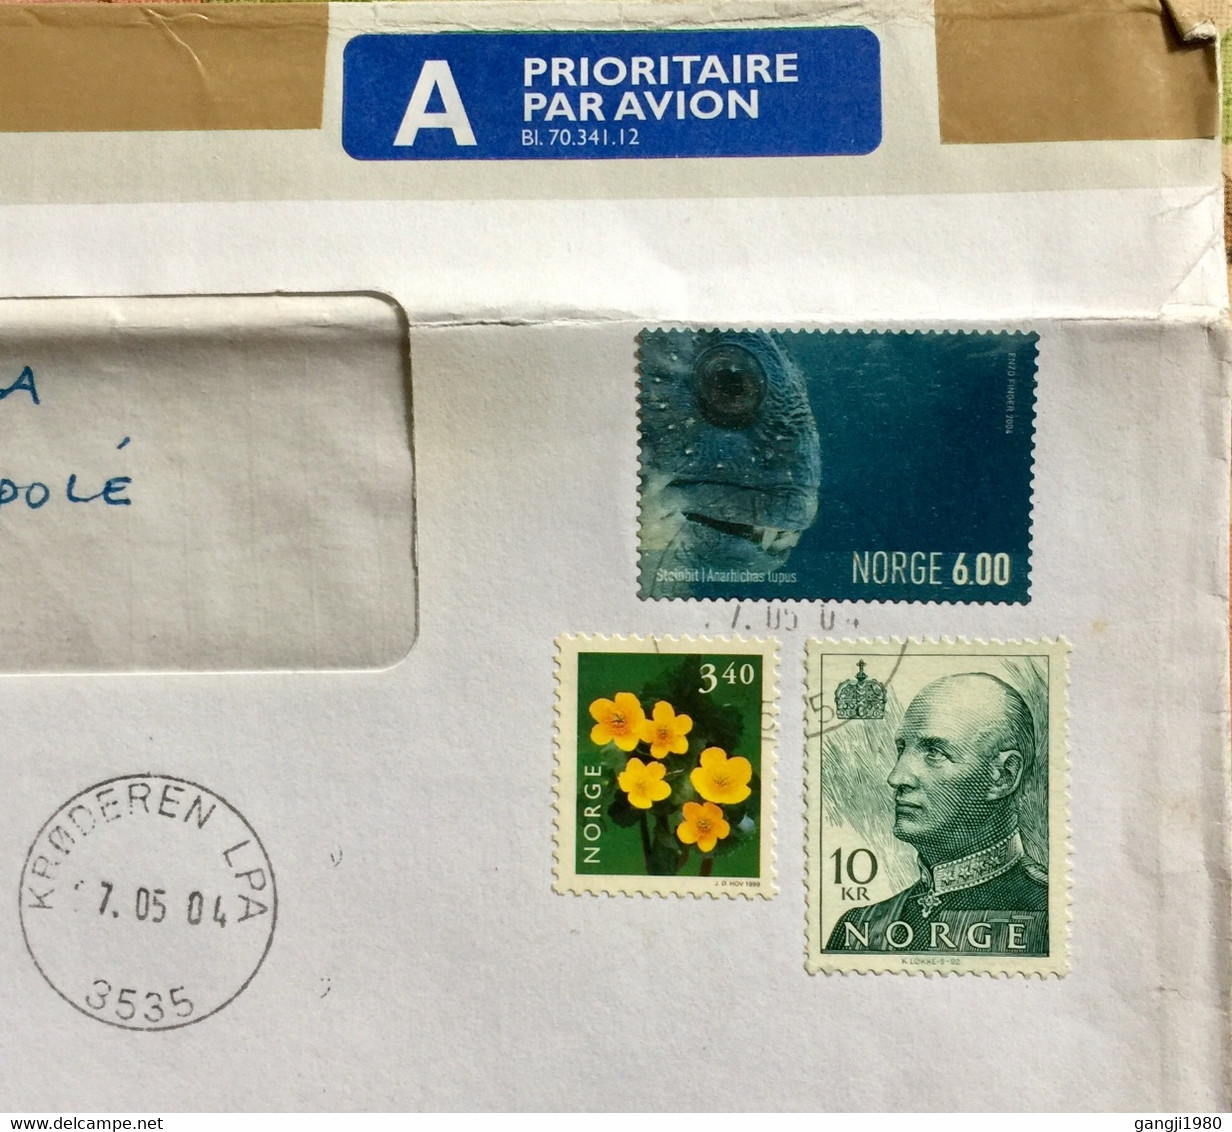 NORWAY 2004,AIRMAIL USED COVER TO LITHUANIA, KRODERN LPA,MARIJAMPOLE, CANCELLATION,19=40 KROWN RATE !!! FISH ,FLOWER, - Briefe U. Dokumente